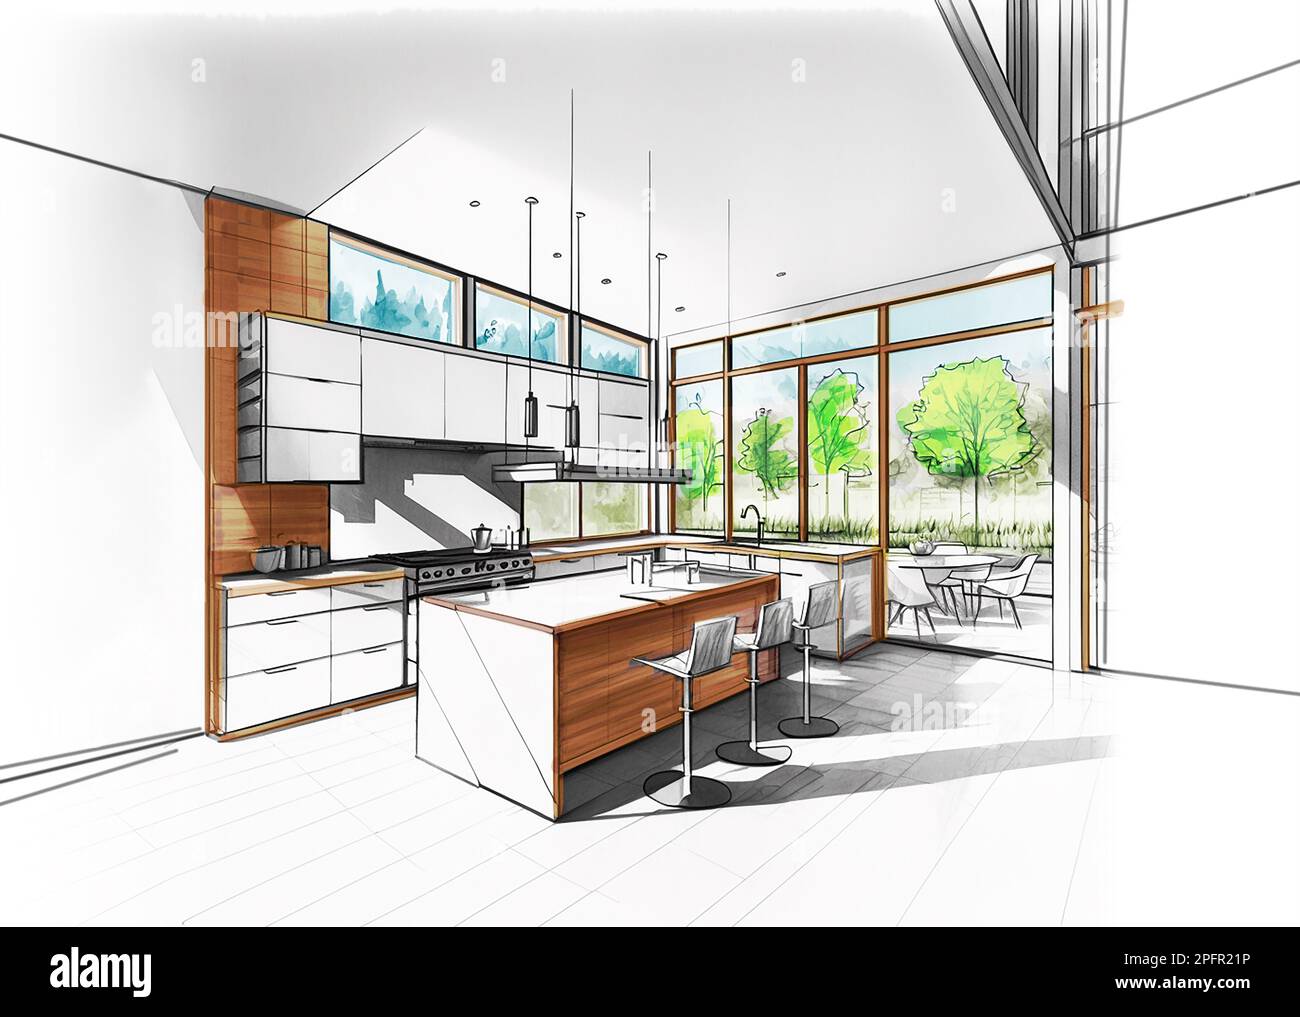 Colored sketch drawing of a modern modern kitchen, architectural design Stock Photo